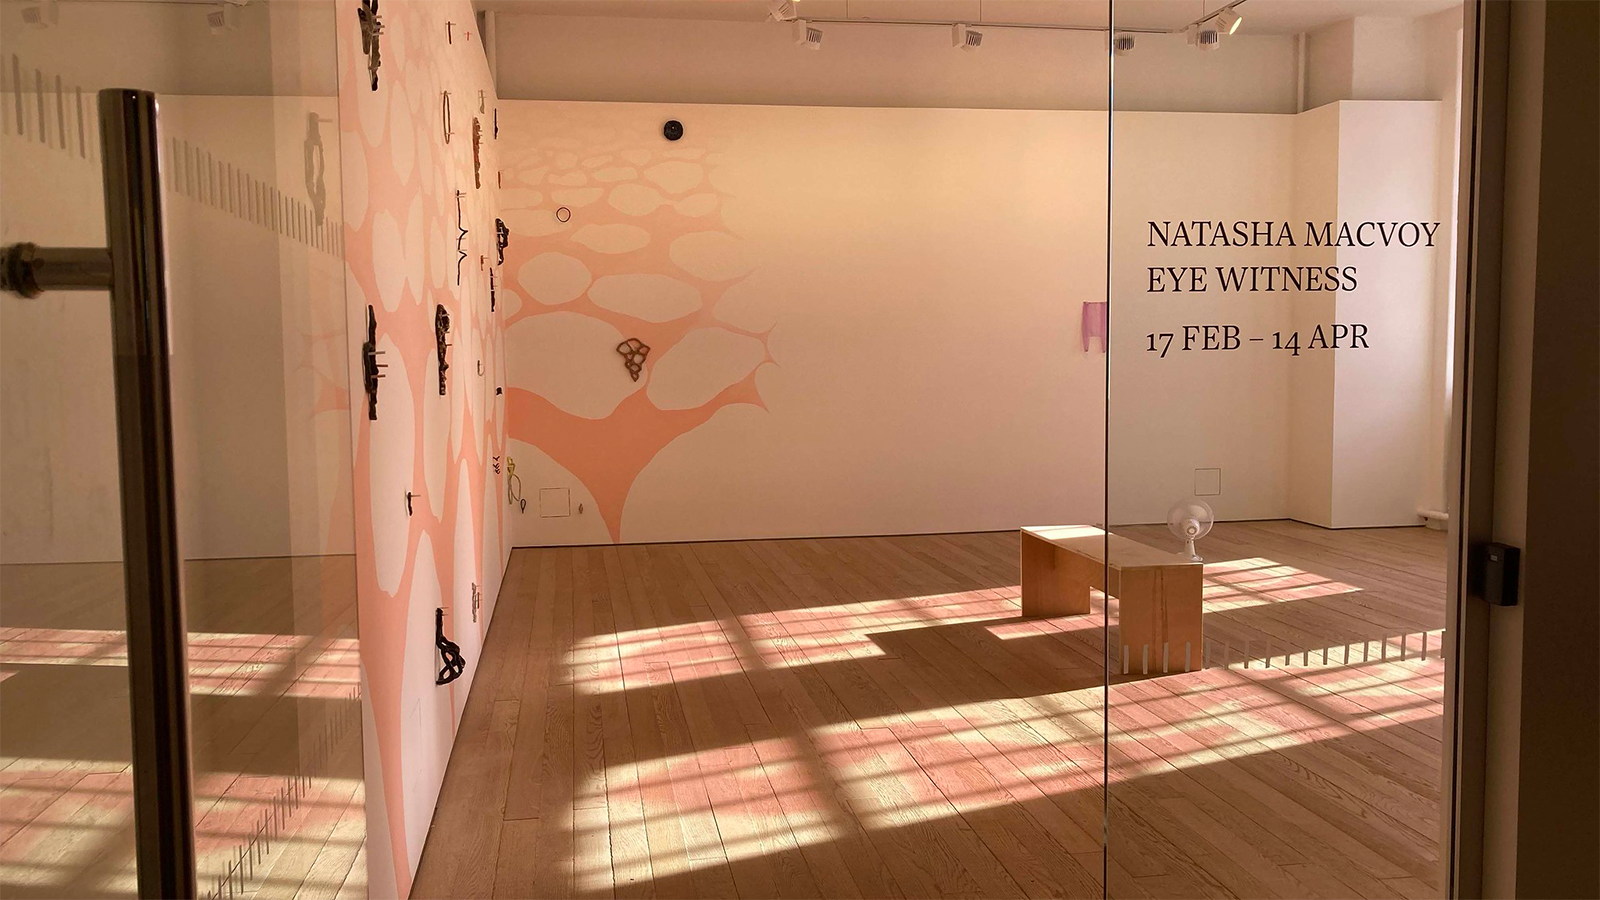 Natasha MacVoys exhibition which is casting pink shapes onto the gallery floor